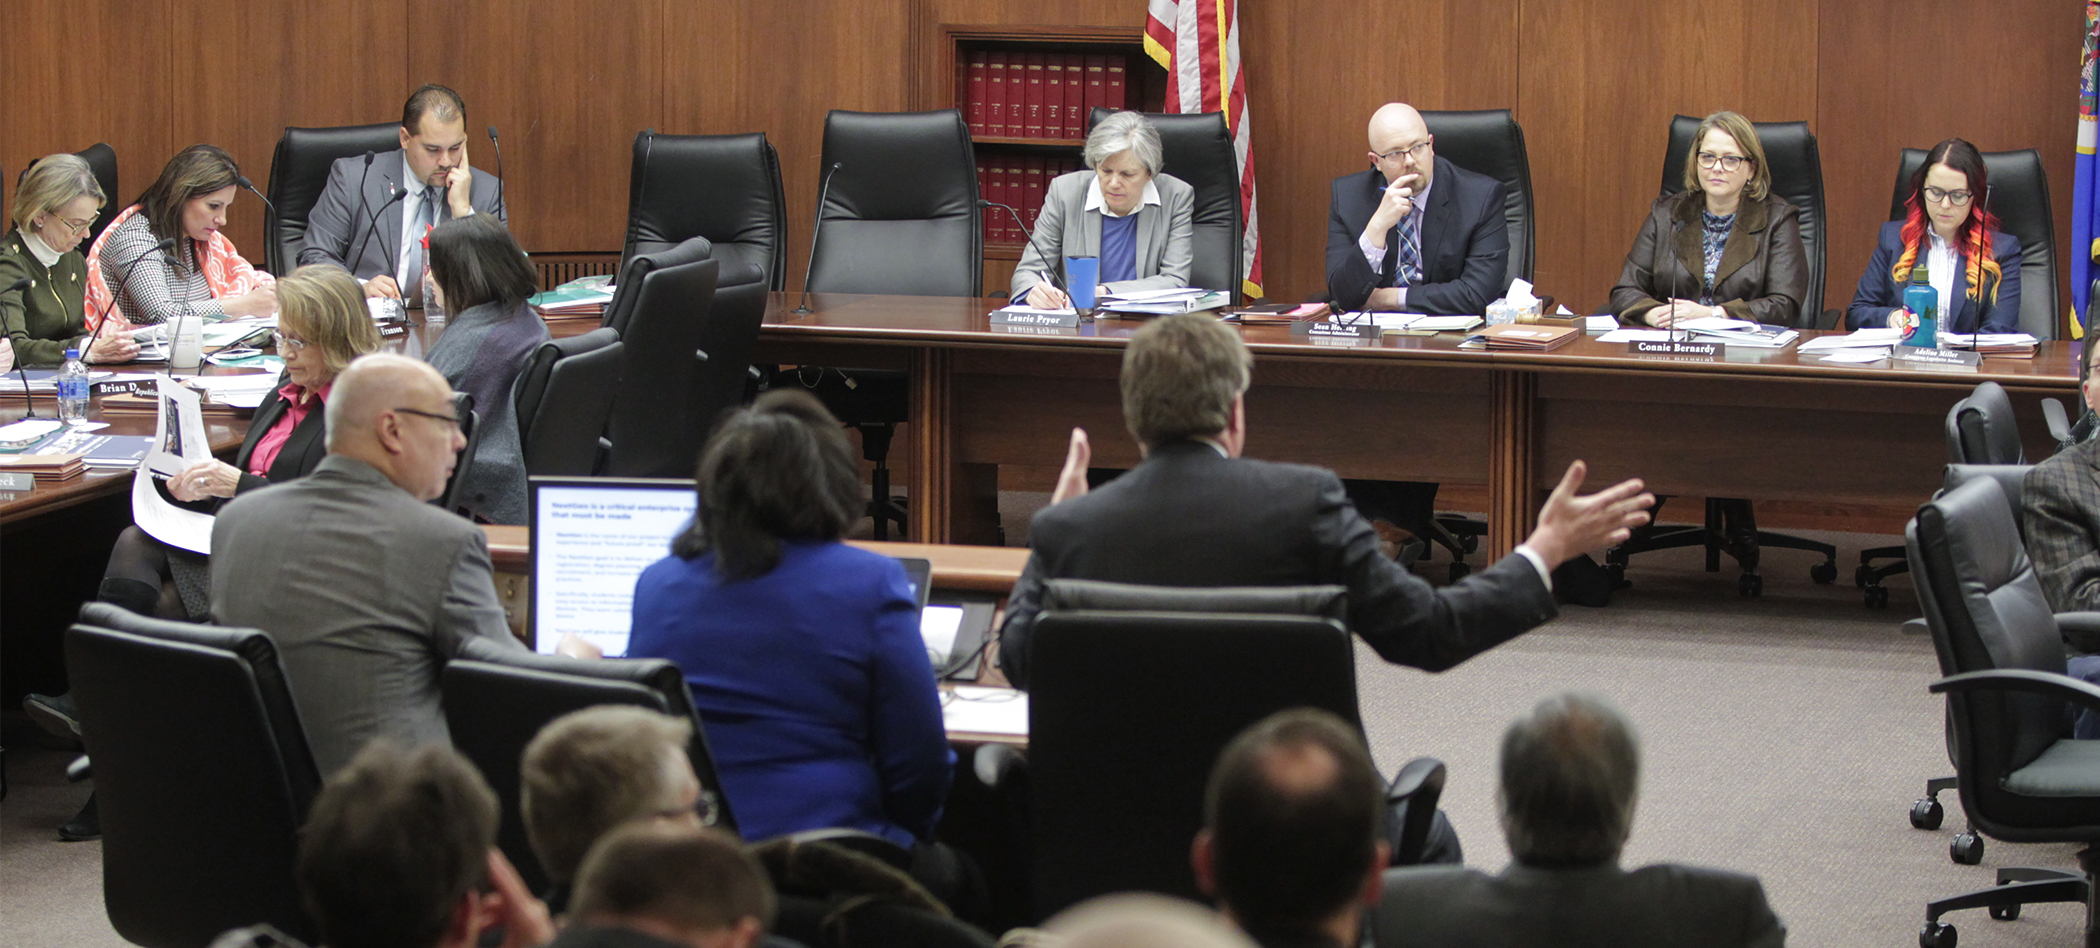 Members of the House Higher Education Finance and Policy Division listen to testifiers from Minnesota State outline provisions of the system’s technology budget request Feb. 6. Photo by Paul Battaglia